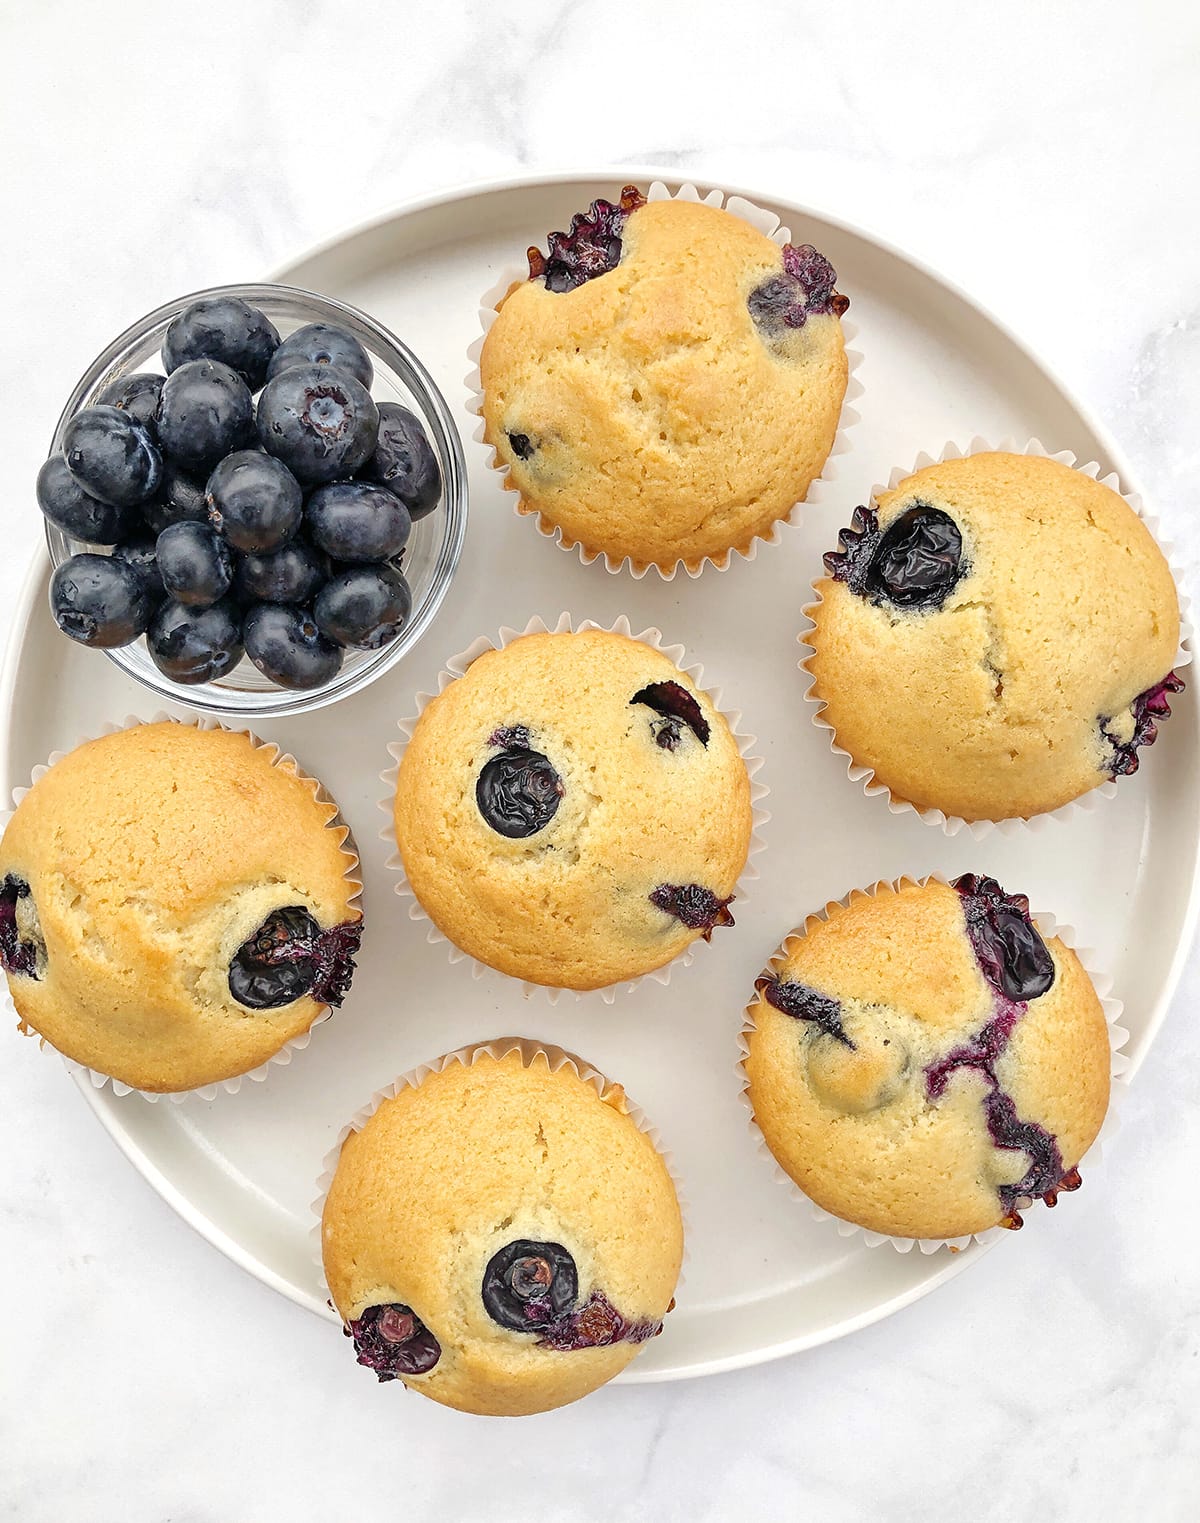 Dairy-free-blueberry-muffins-on-a-plate-with-extra-fresh-blueberries